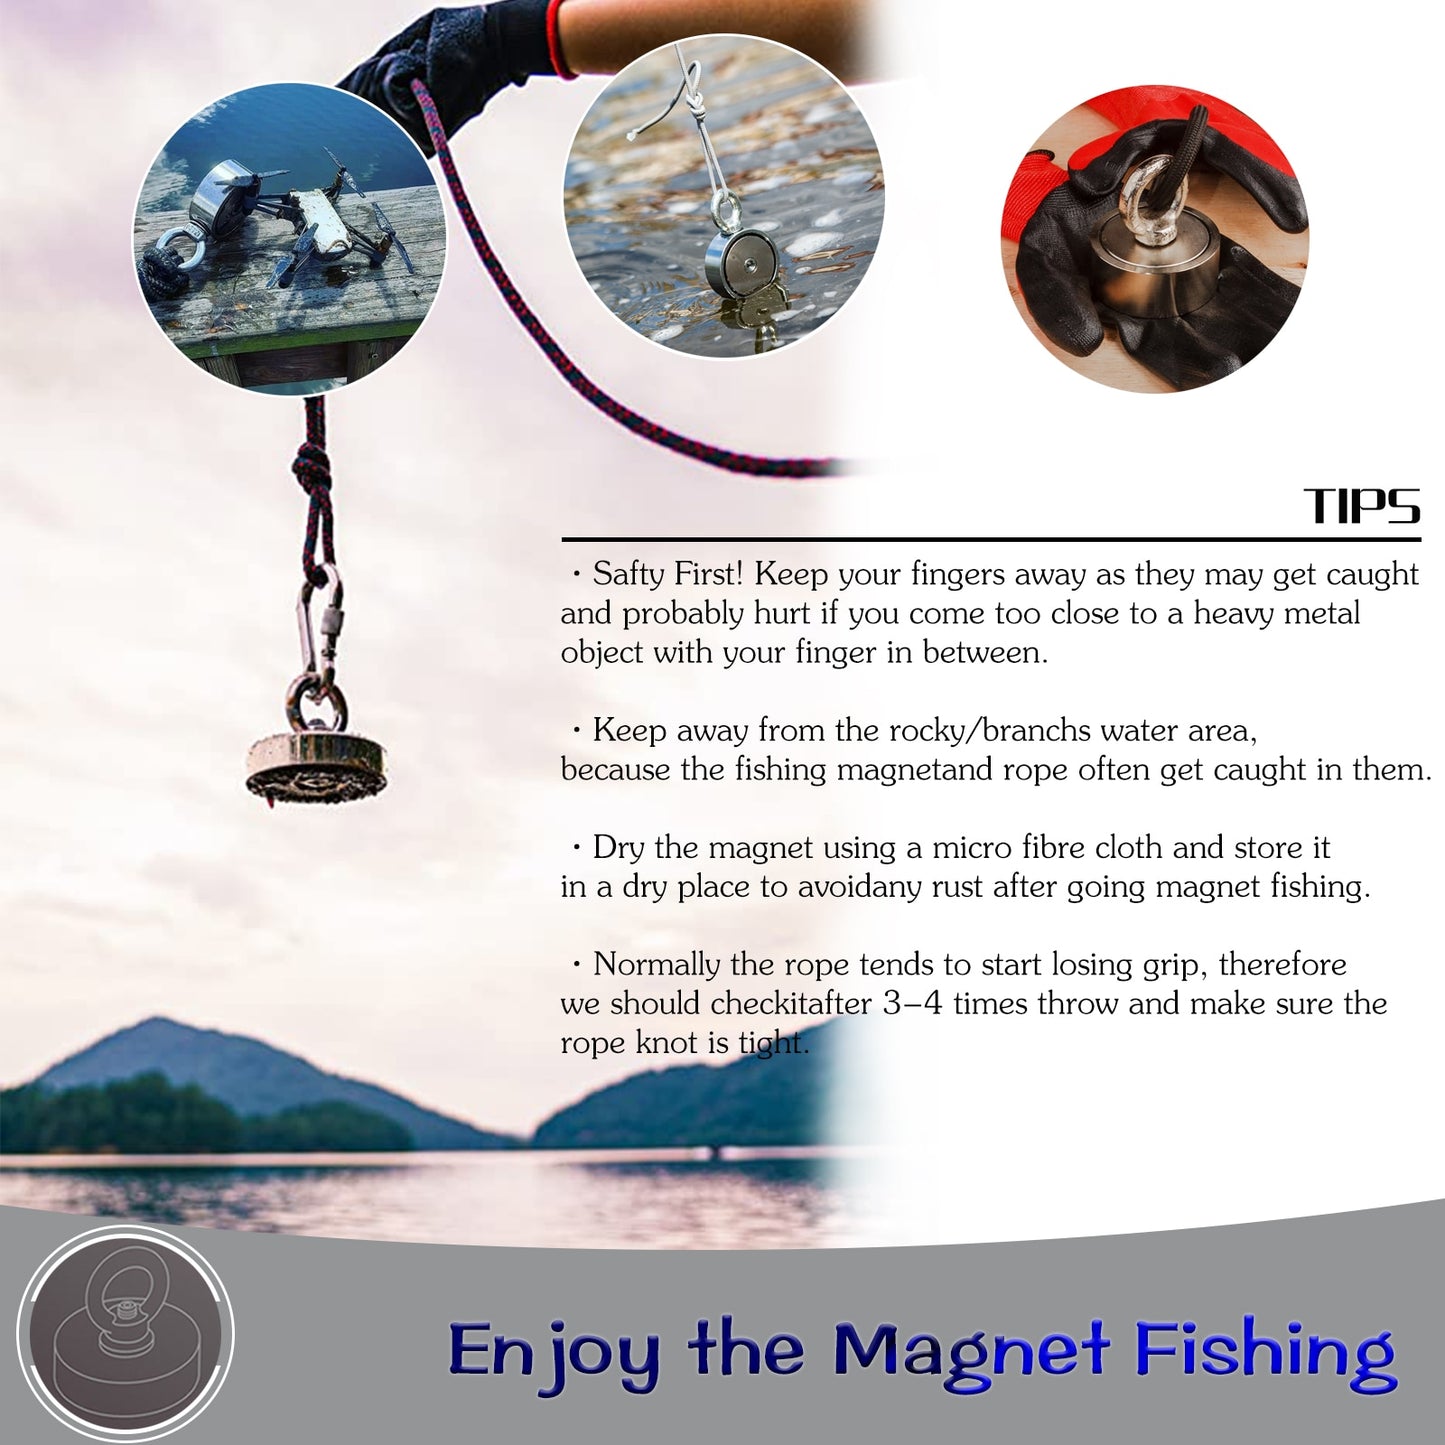 Double Side Permanent Magnet - High-Power Fishing Magnets for Efficient Iron Search